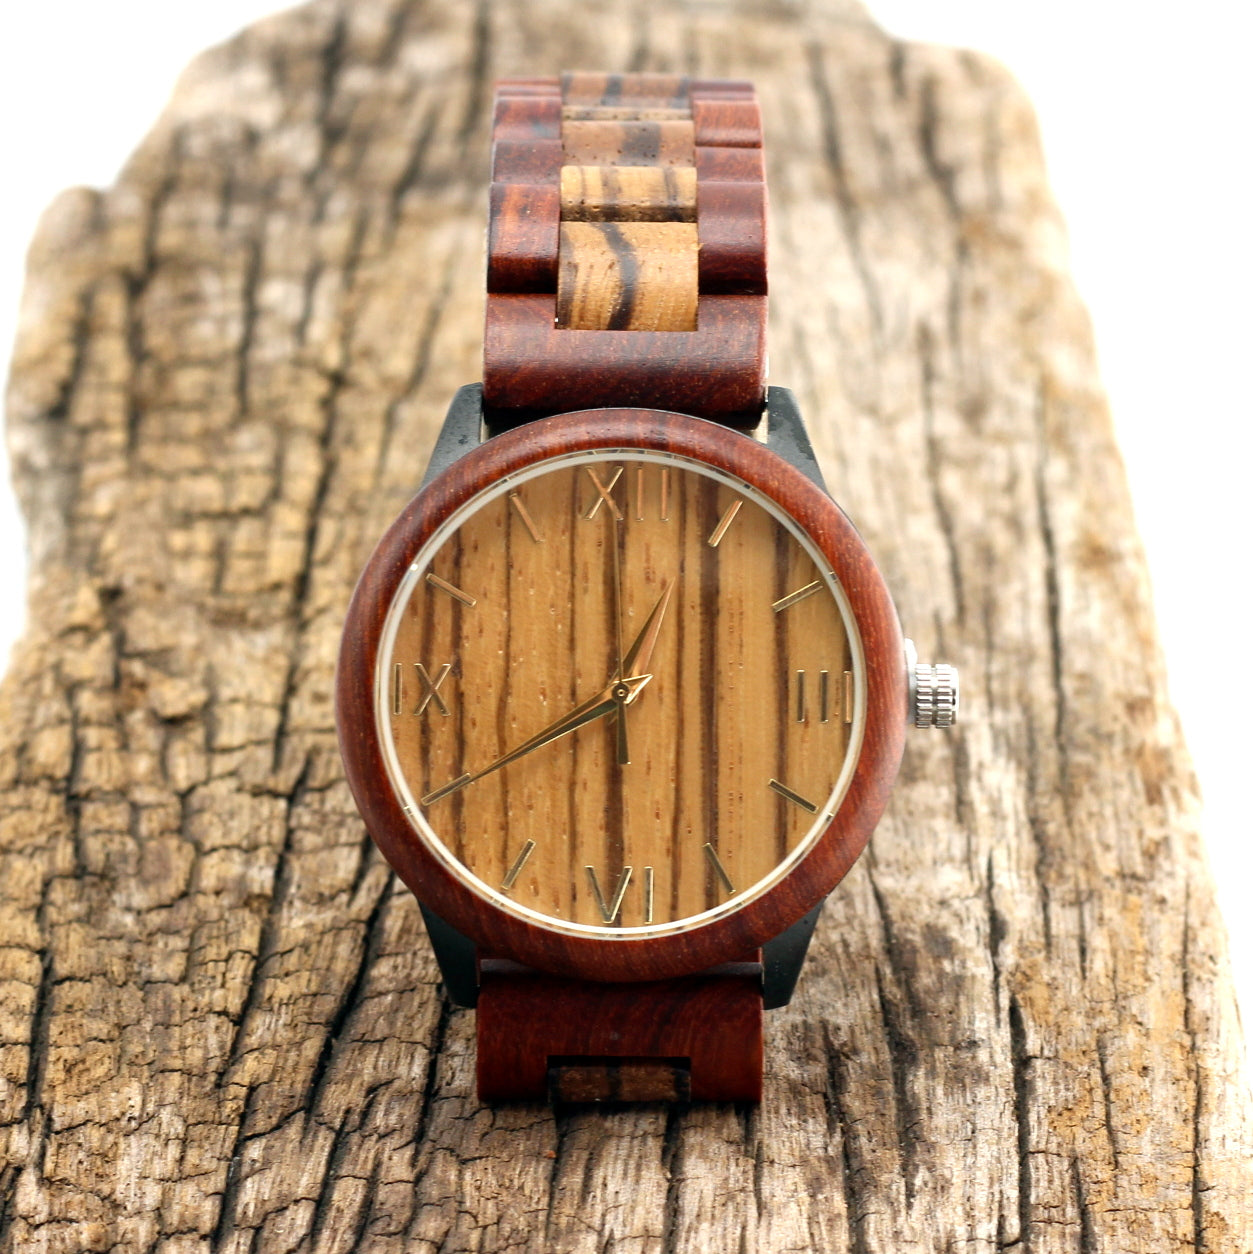 Men's red sandalwood and zebra watch with matching wooden strap, stainless steel case. Engrave your personalised message on the back for R100. Hashtag Bamboo, bewell.